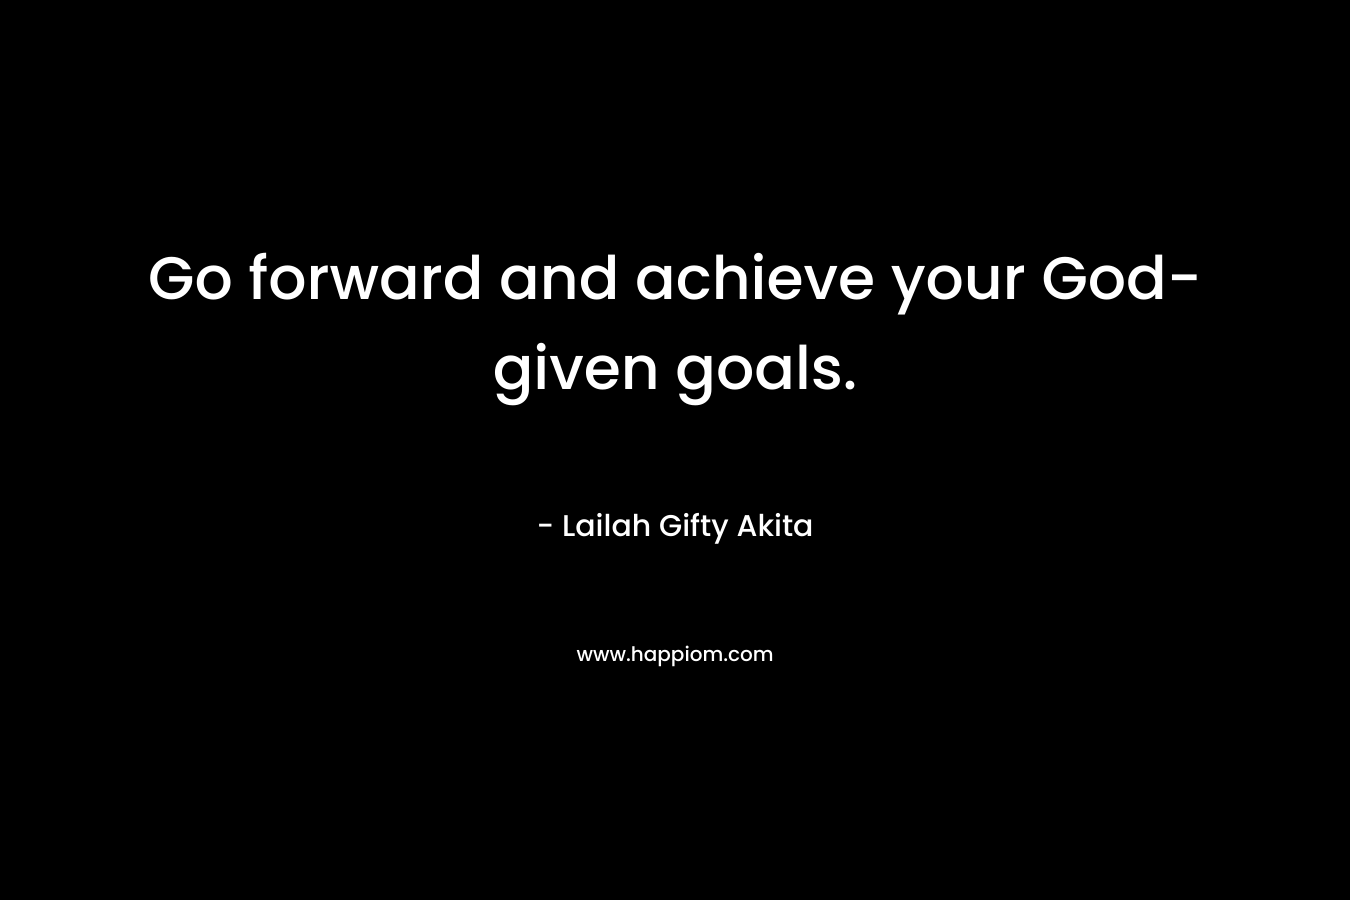 Go forward and achieve your God-given goals.